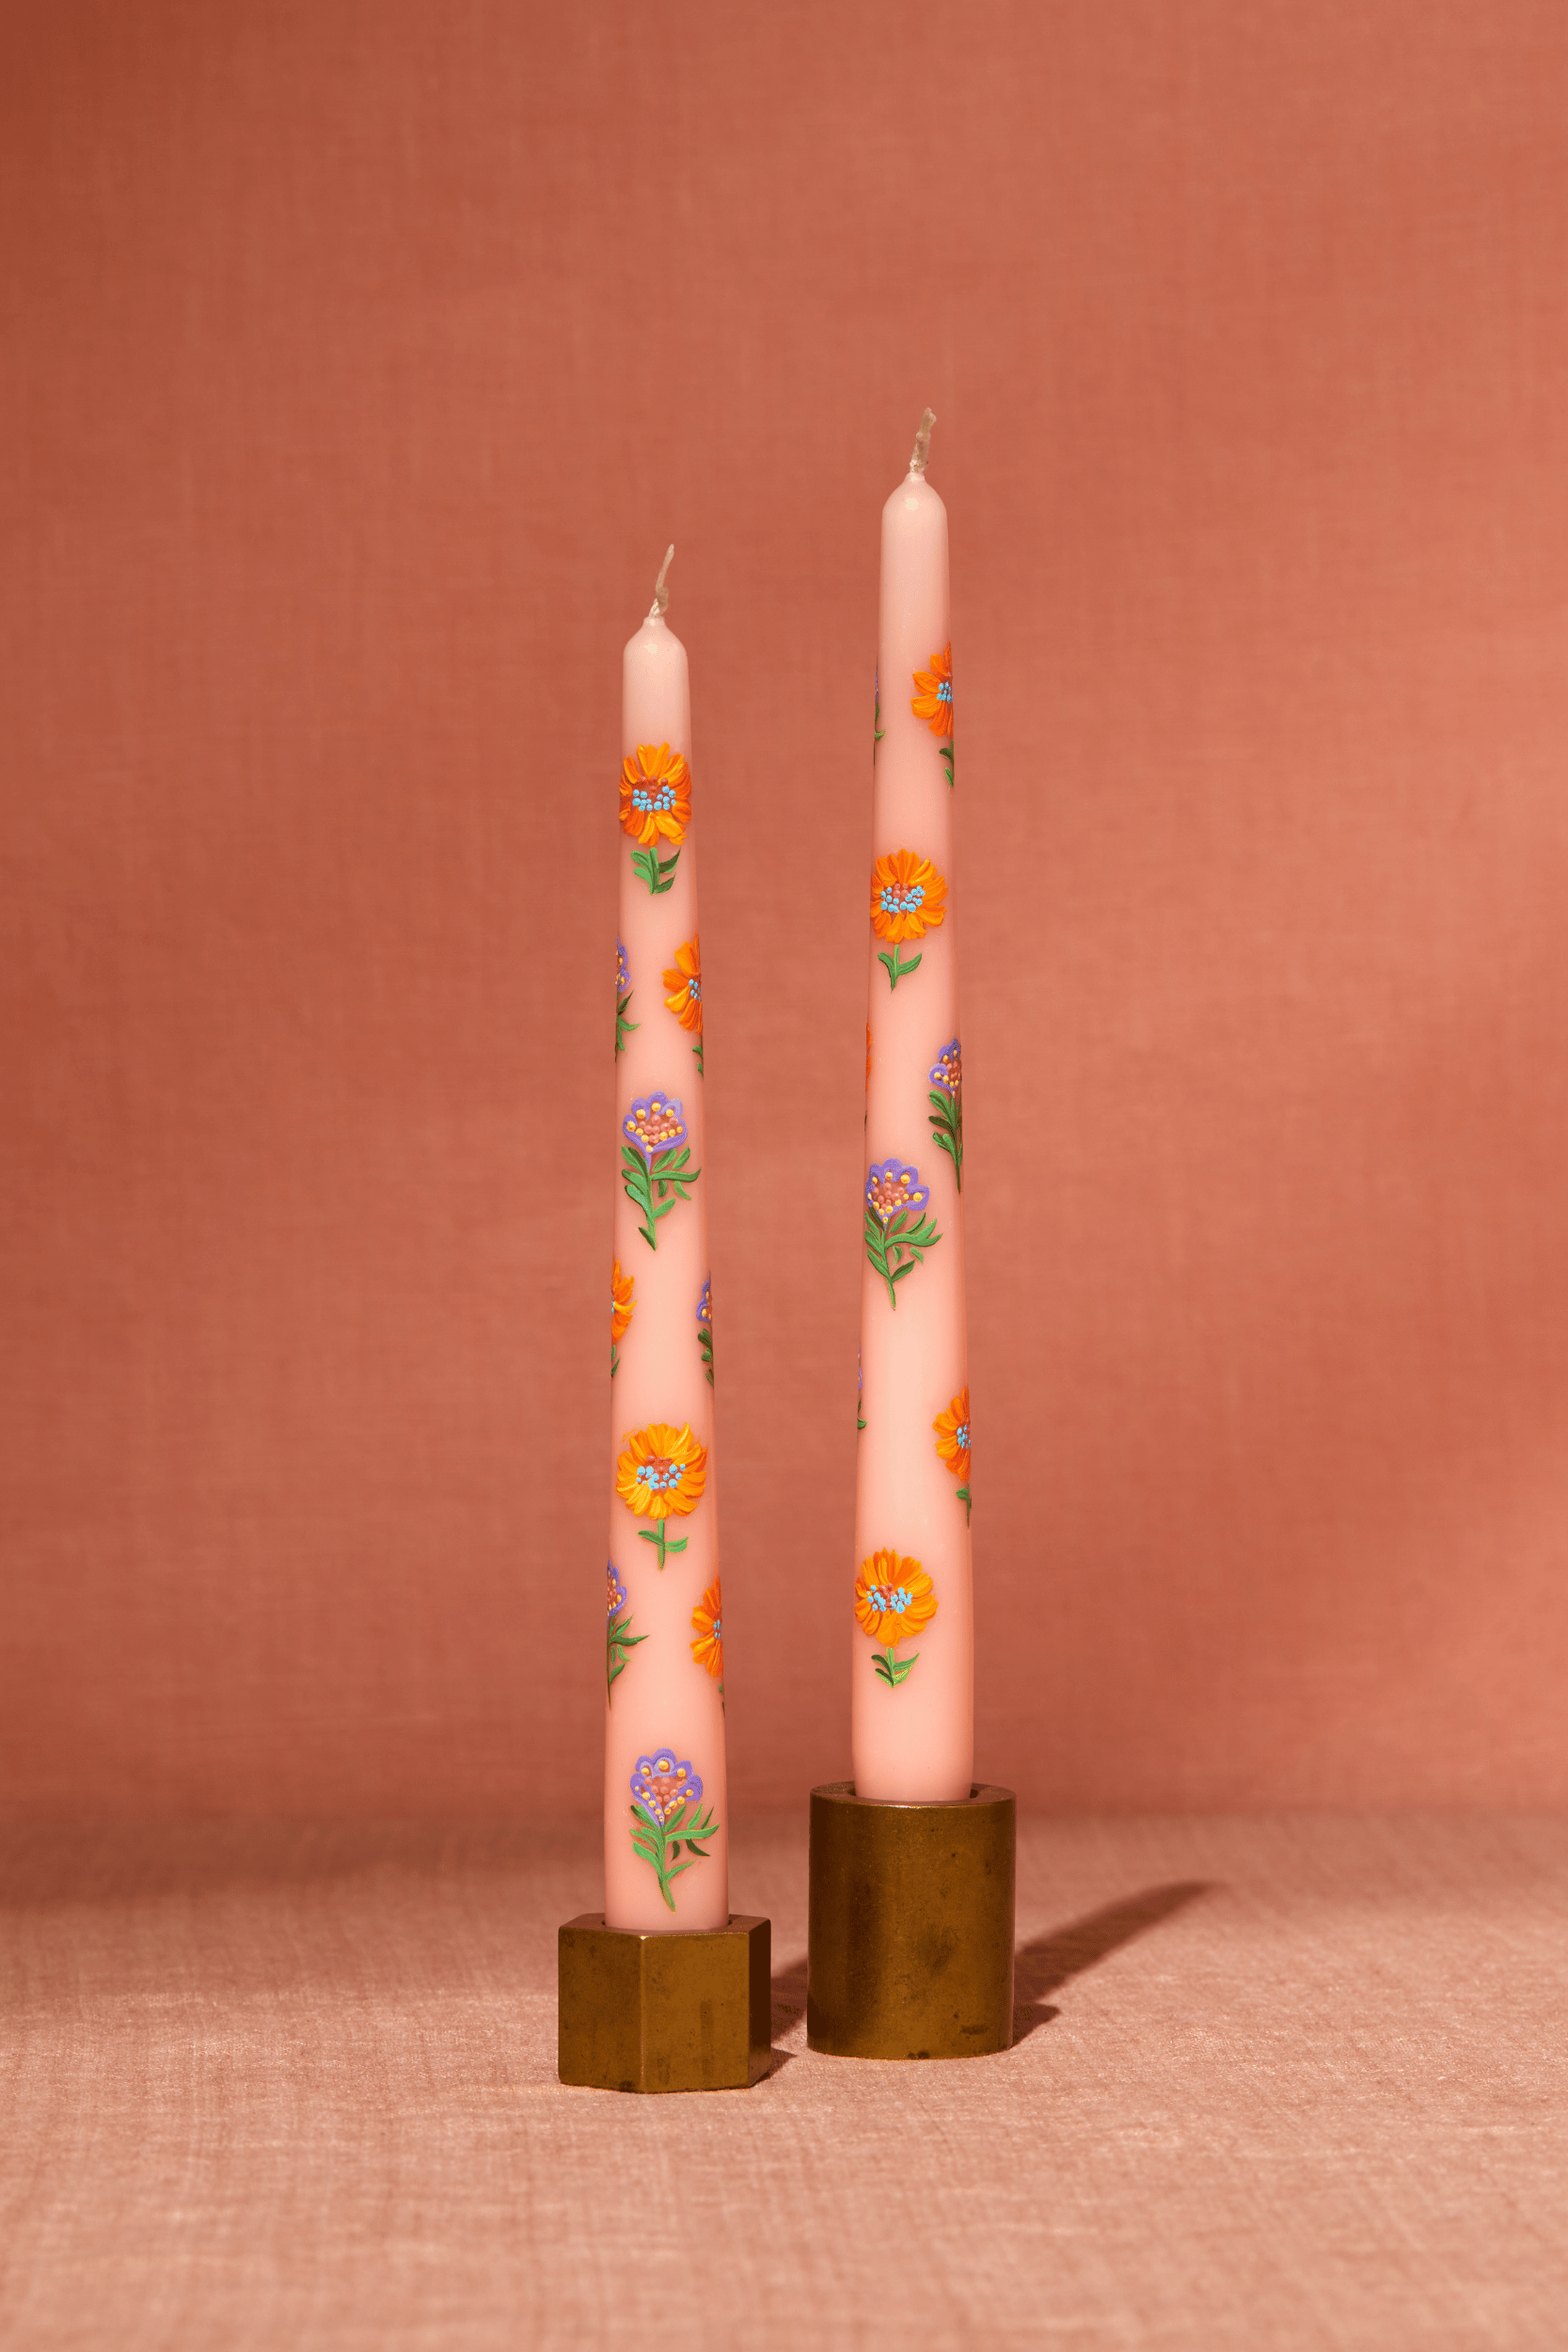 A set of two 10" tapered peach candles stands in brass candlesticks. Each candle is adored with handpainted flowers in peach and lavender shades. The image is shot straight on with warm light on a peach backdrop.